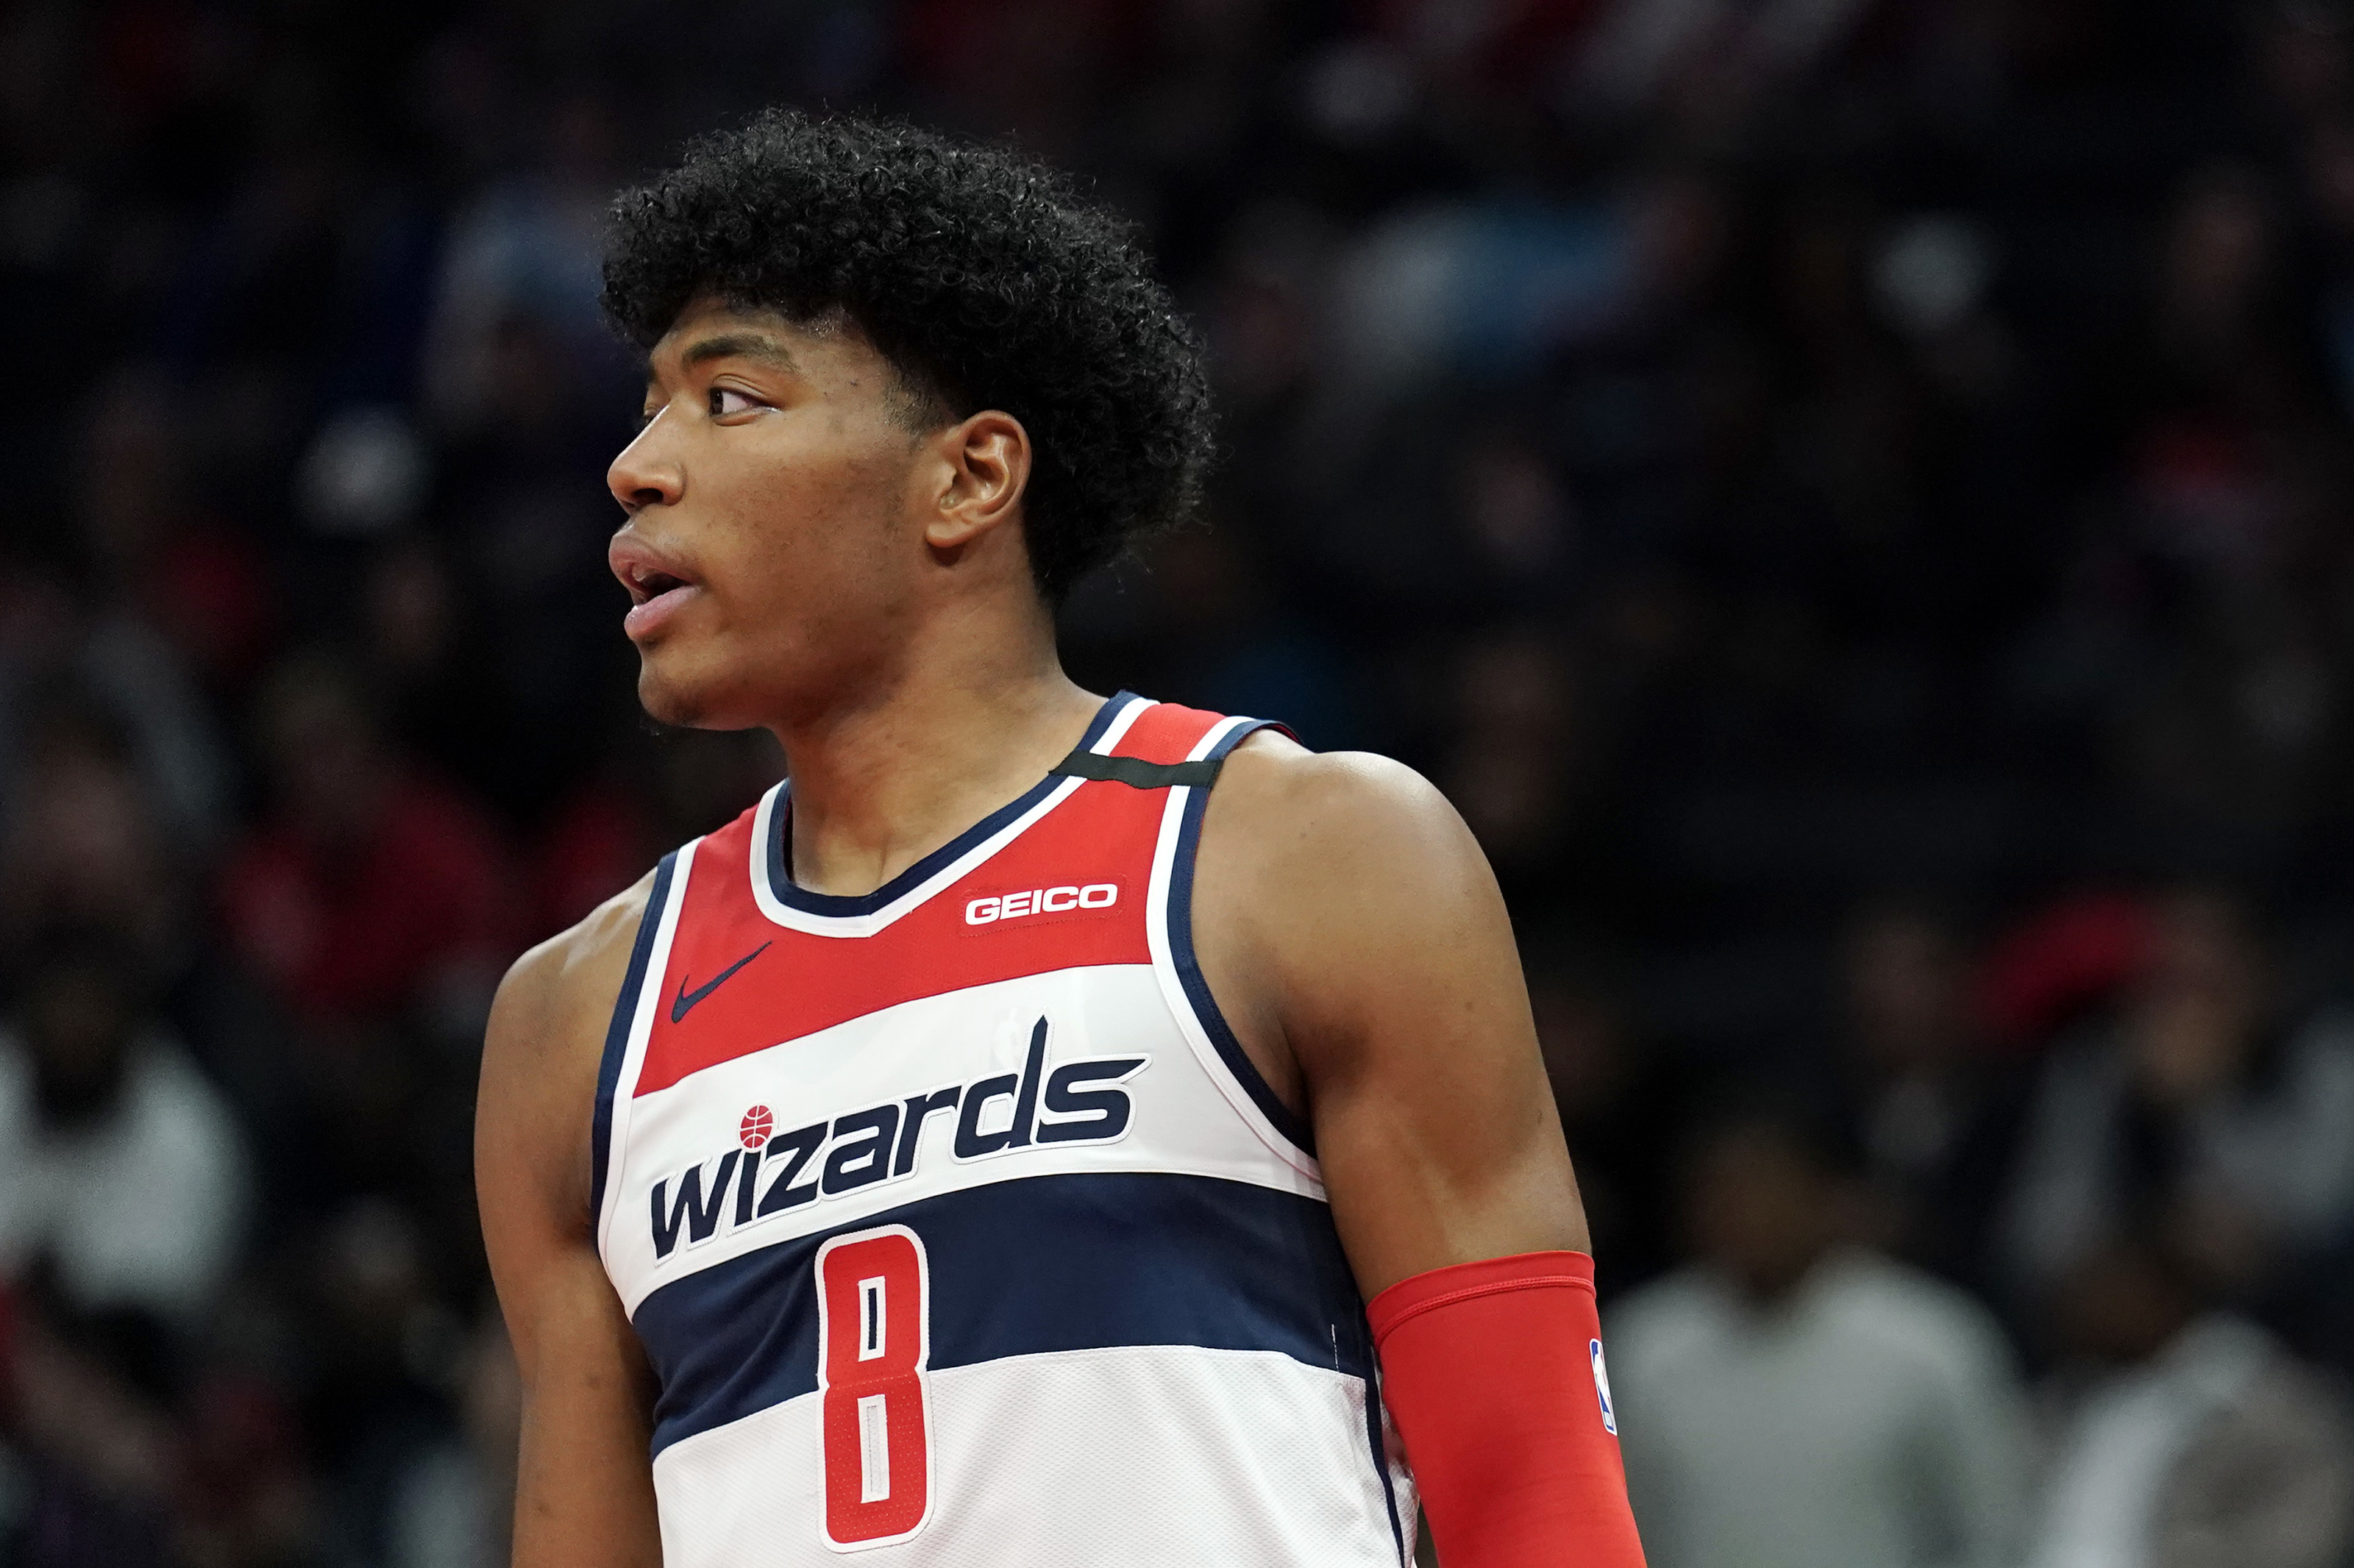 Rui Hachimura reveals the reason for choosing #28 for his jersey: “I'm  wearing number 28”